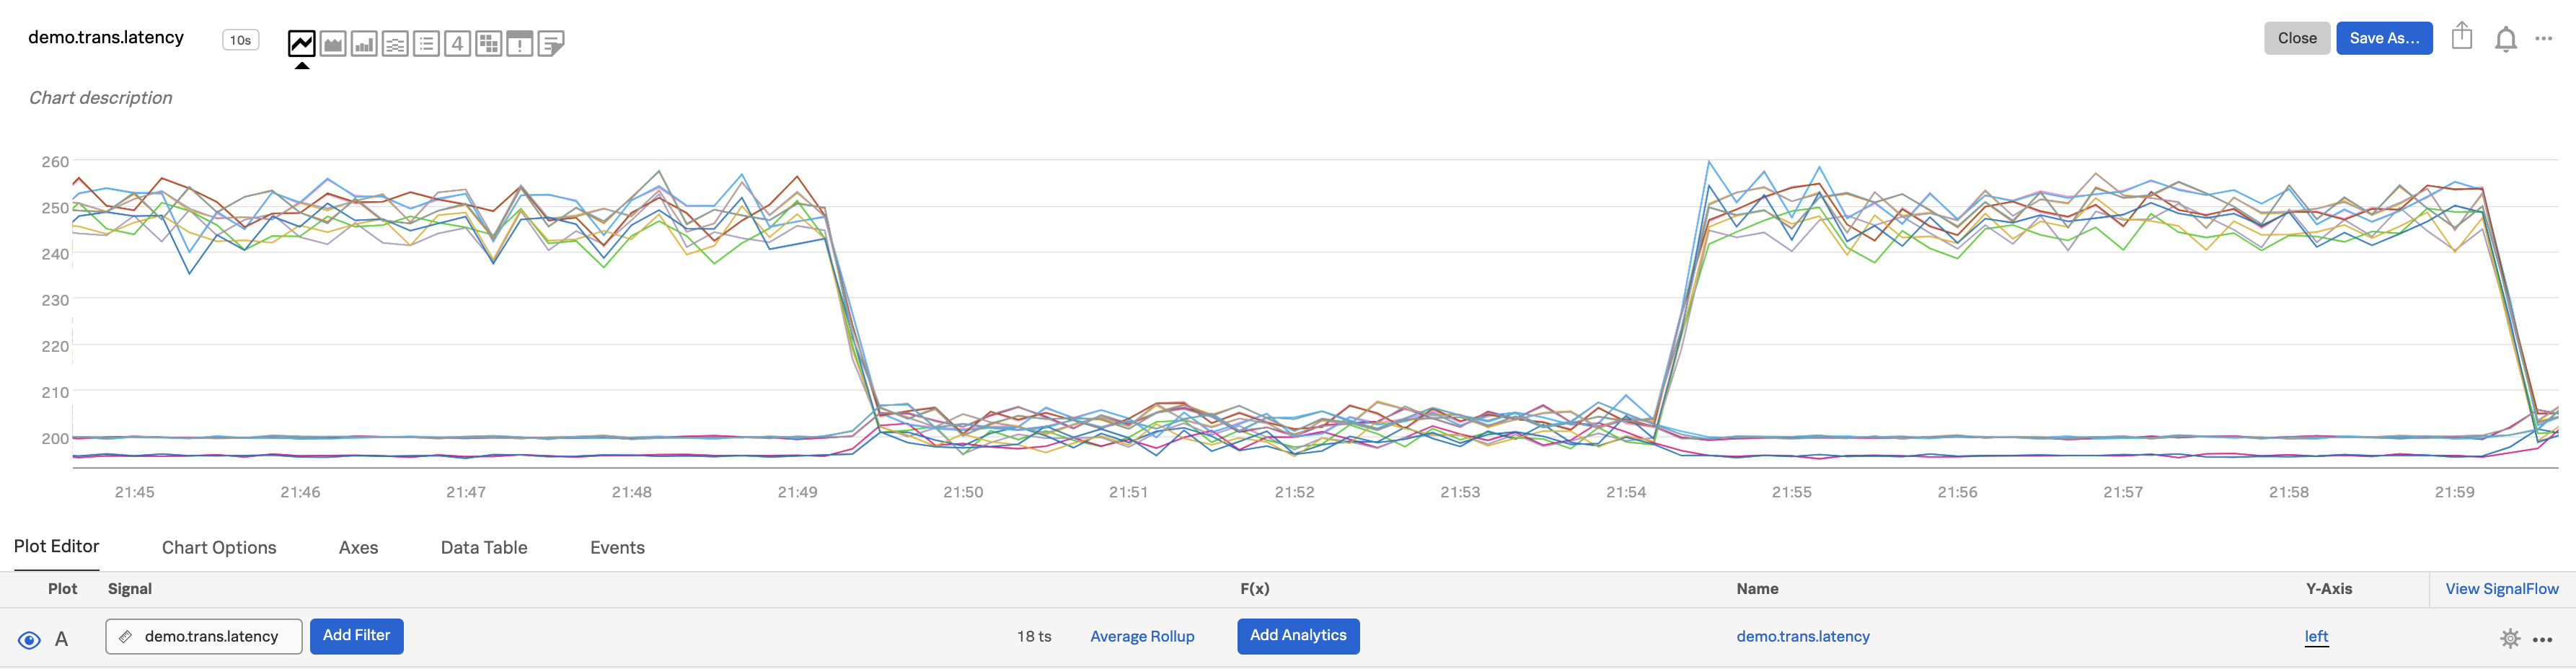 This screenshot shows demo.trans.latency in a line chart view